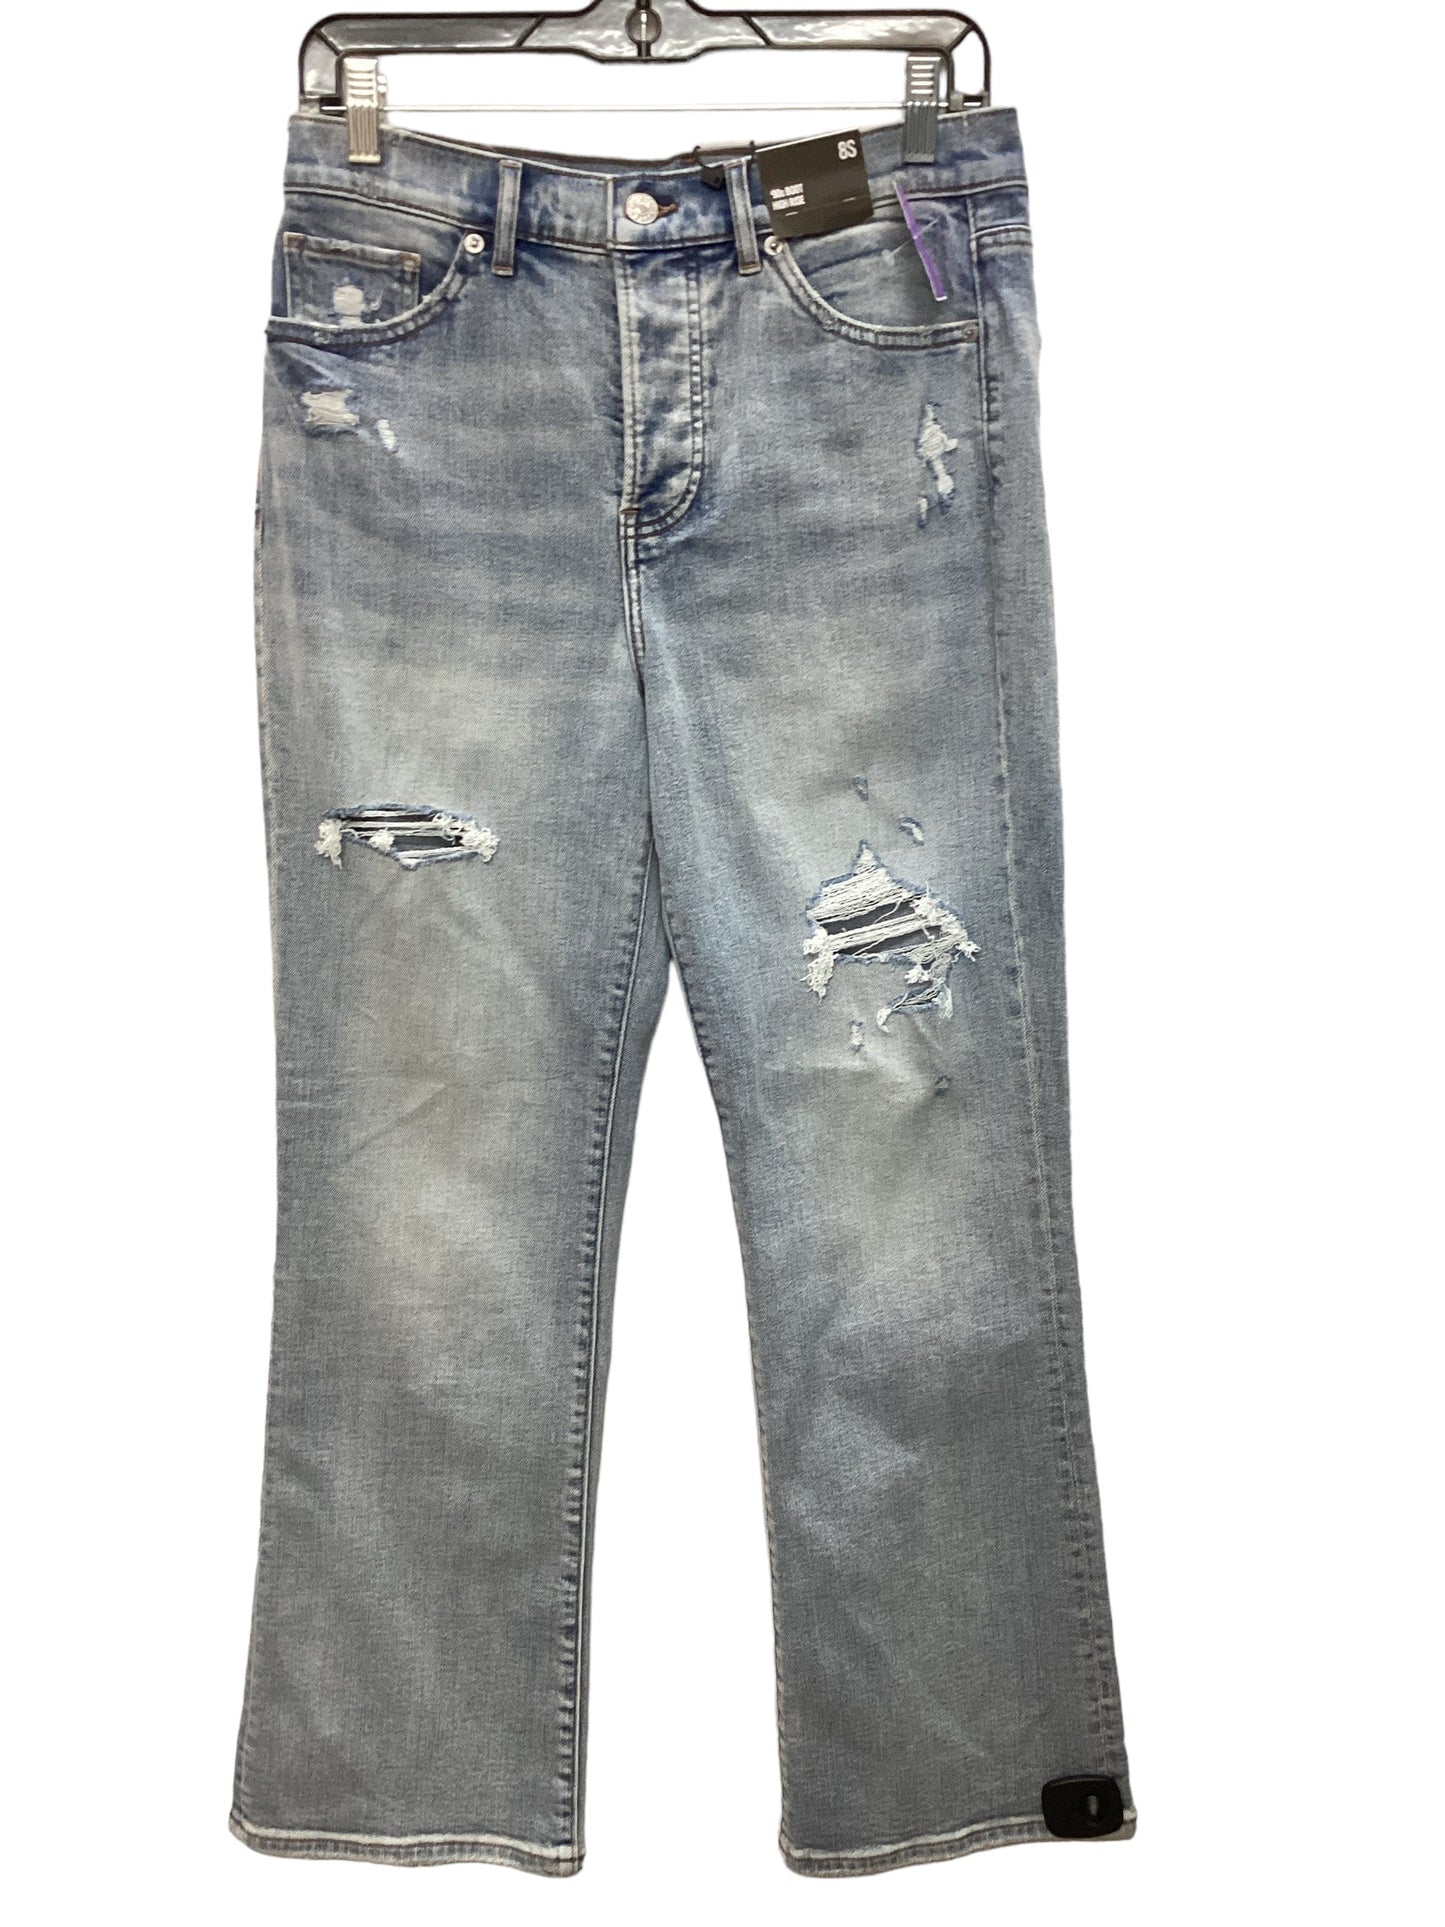 Blue Jeans Boot Cut Express, Size 8